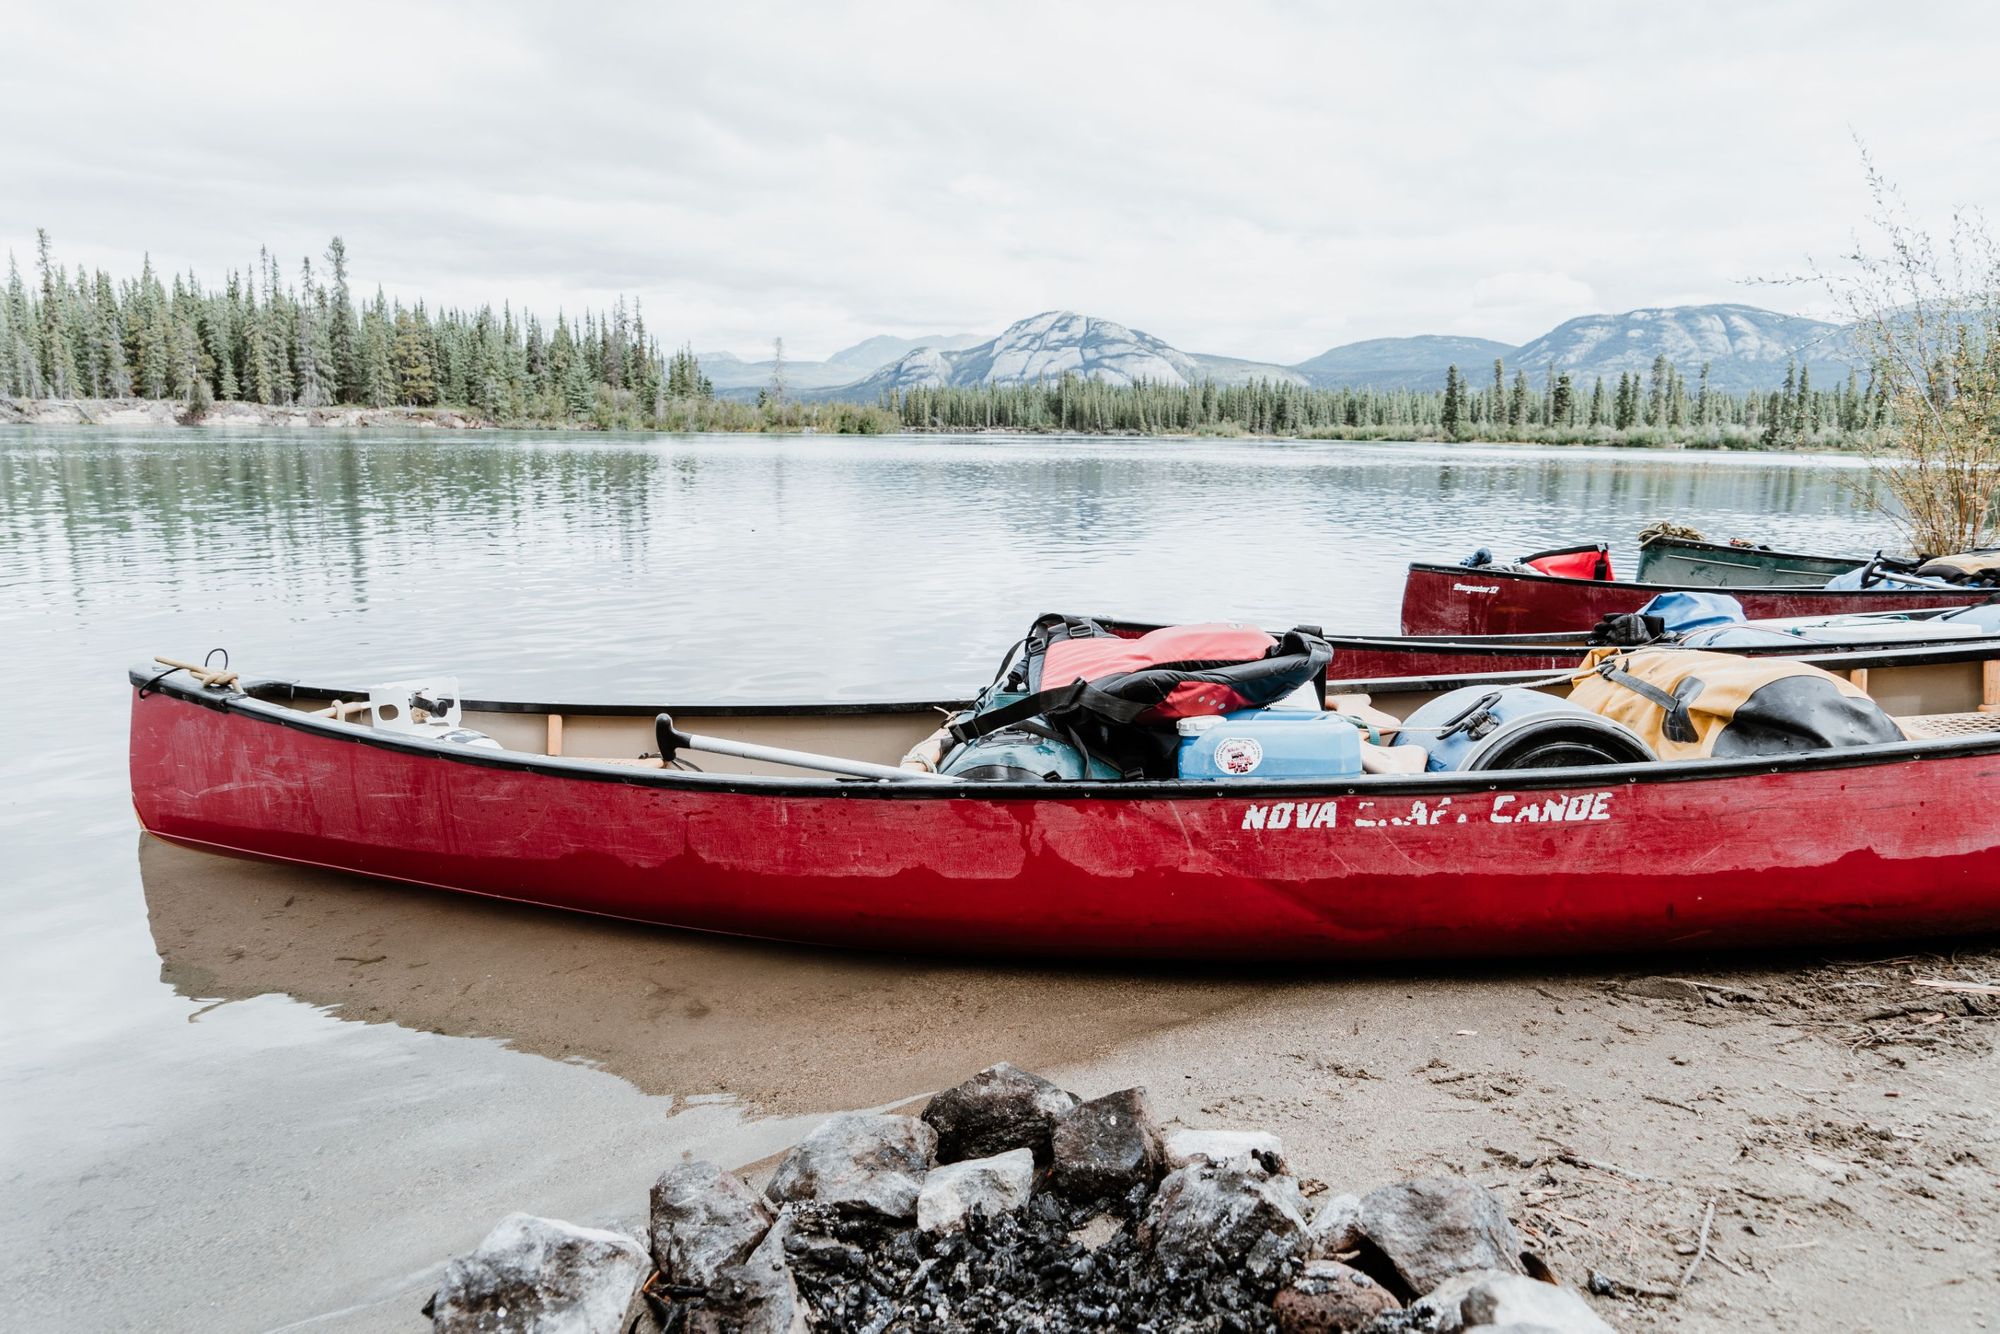 A loaded canoe on the Yukon River, with hills and forest in the background.